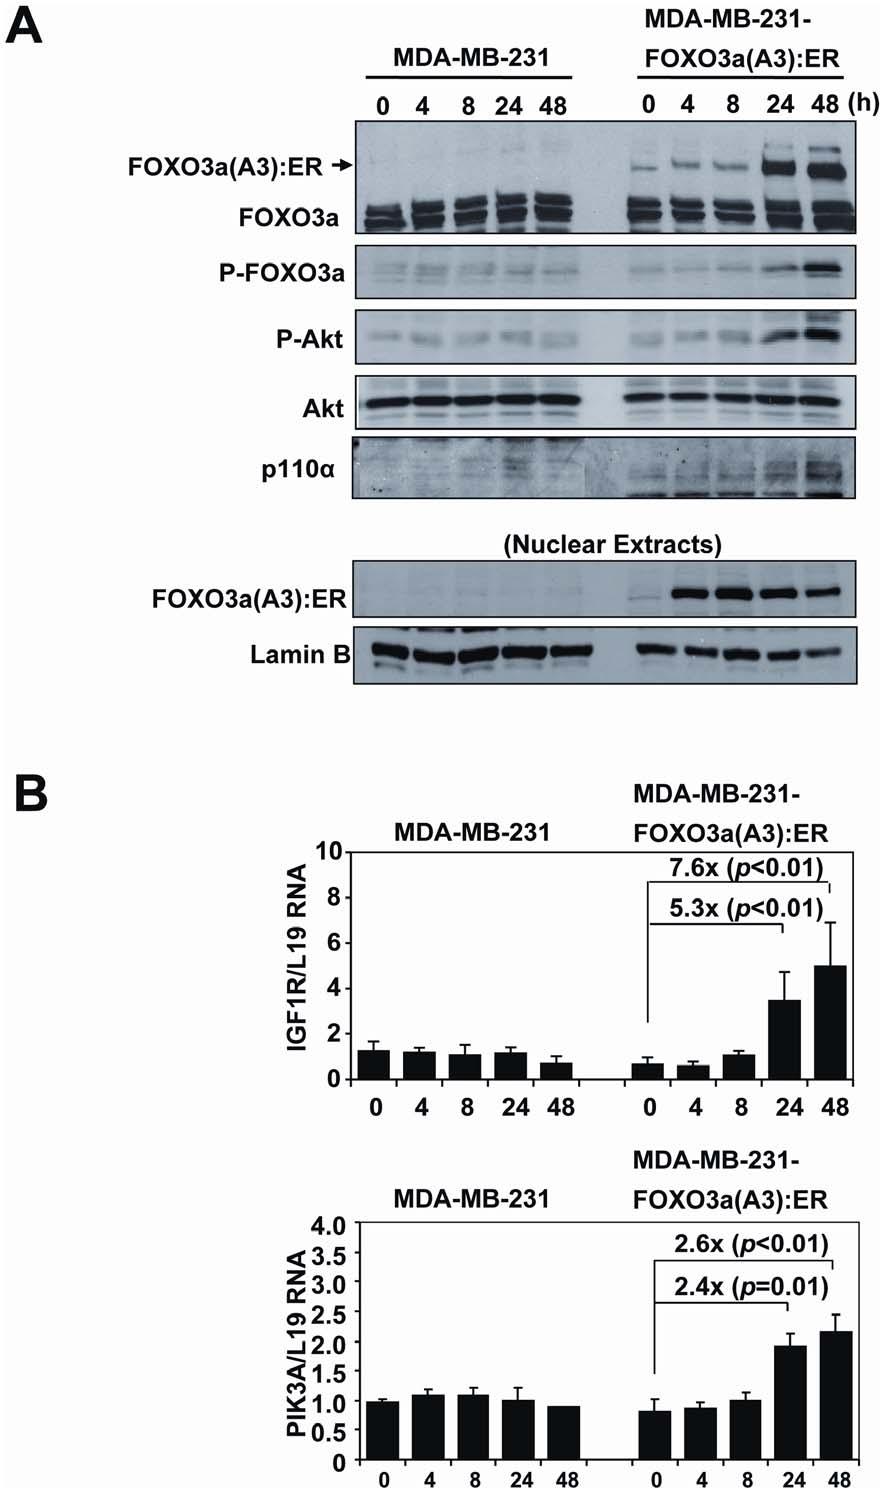 Figure 10. FOXO3a induces Akt phosphorylation, PIK3CA and IGFR1 gene expression in the drug resistant MDA-MB-231 breast carcinoma cells.